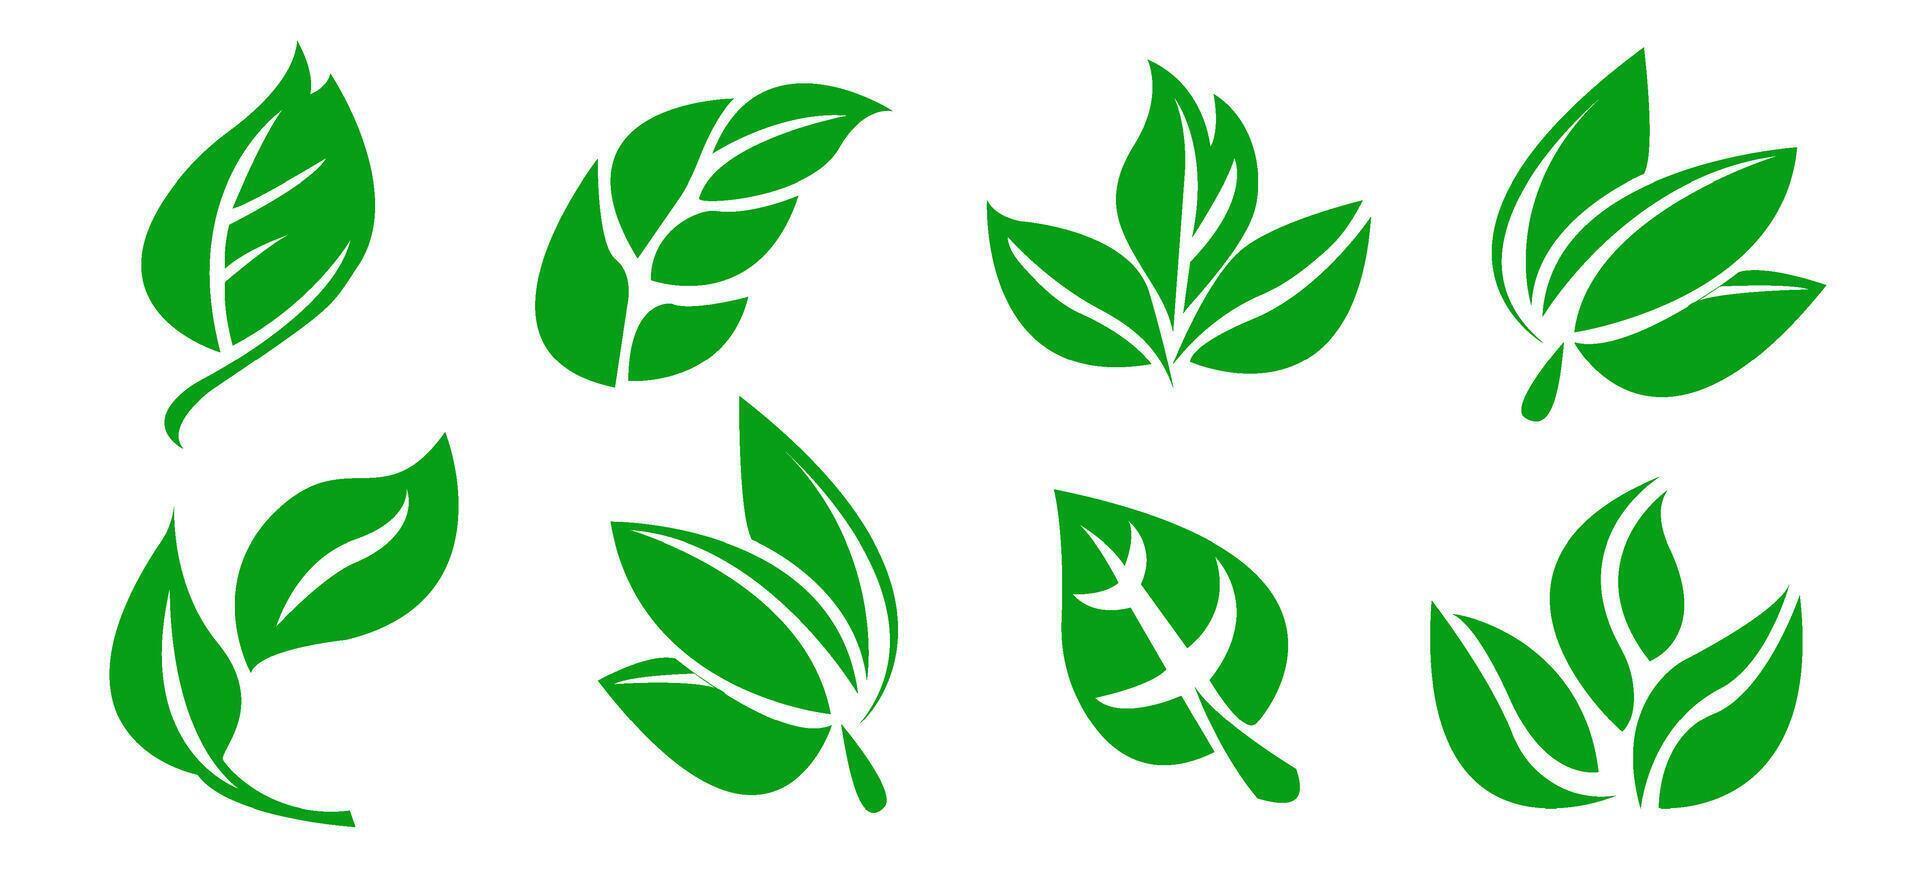 A set of green leaves on a white background, for logos, designs, for the symbolism of the green planet vector